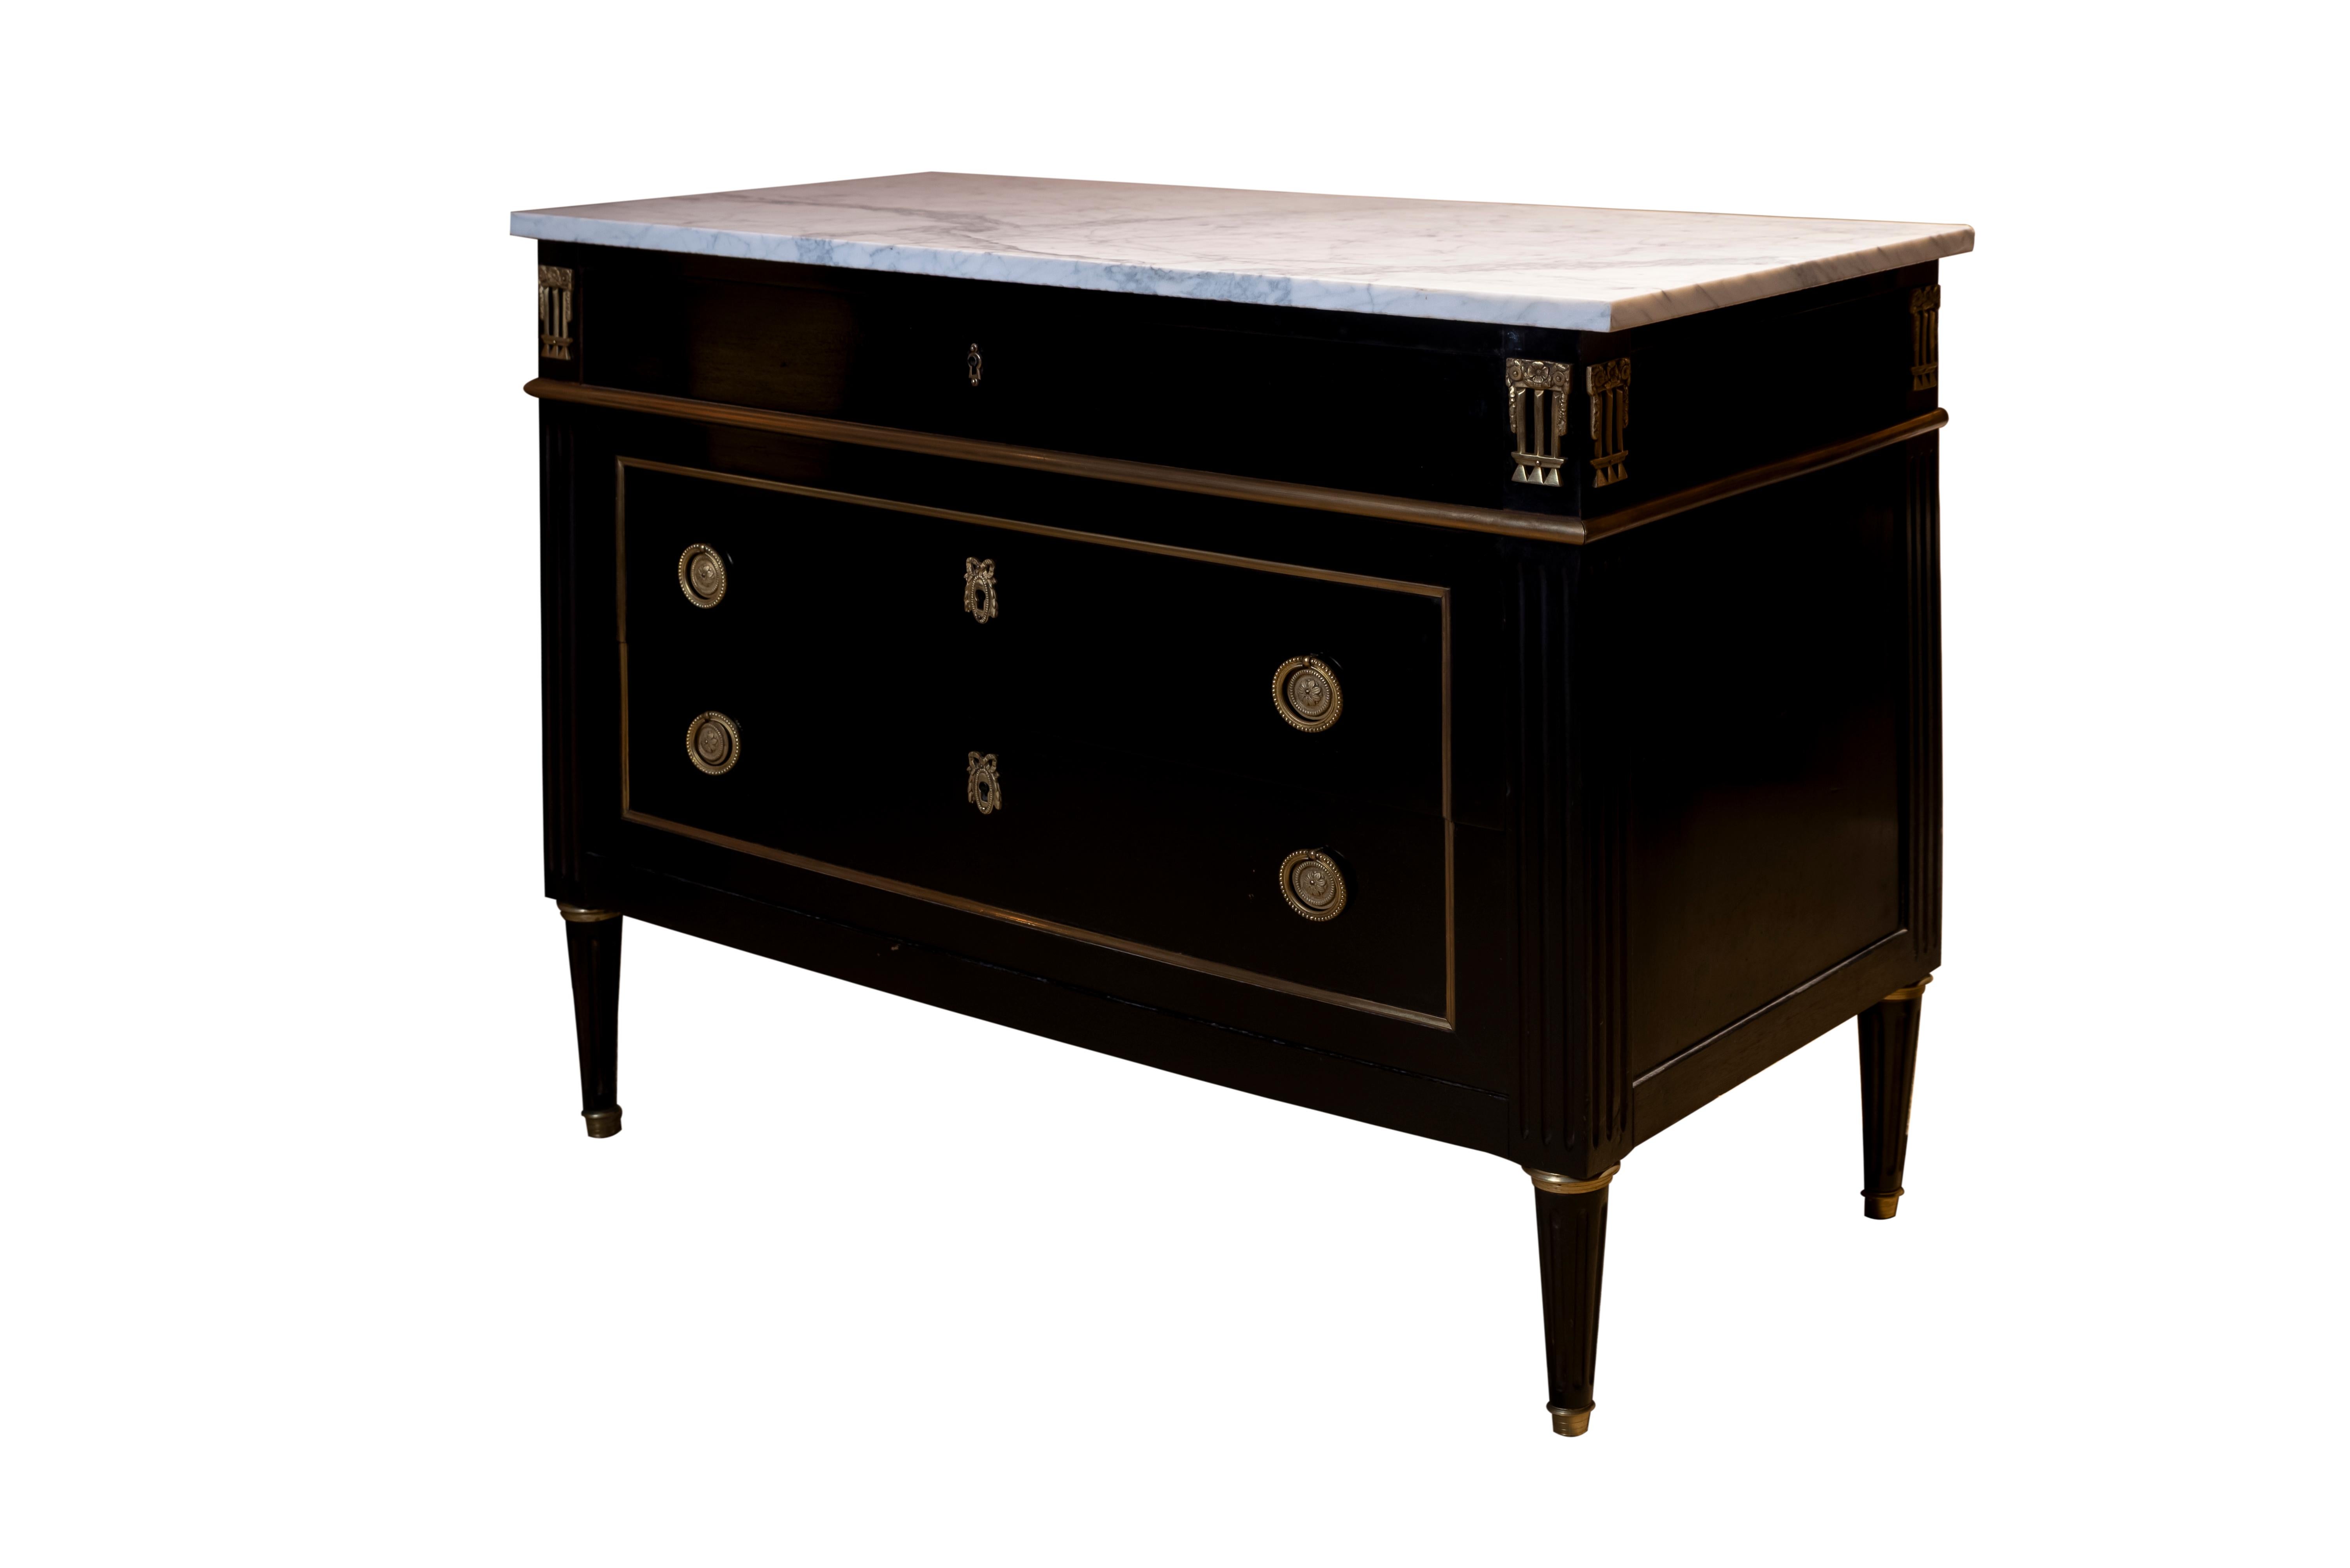 20th century French Louis XVI style black lacquered chest of drawers or commode. Topped with a white marble in four fluted legs with brass details. Three drawers with brass decoration and details.